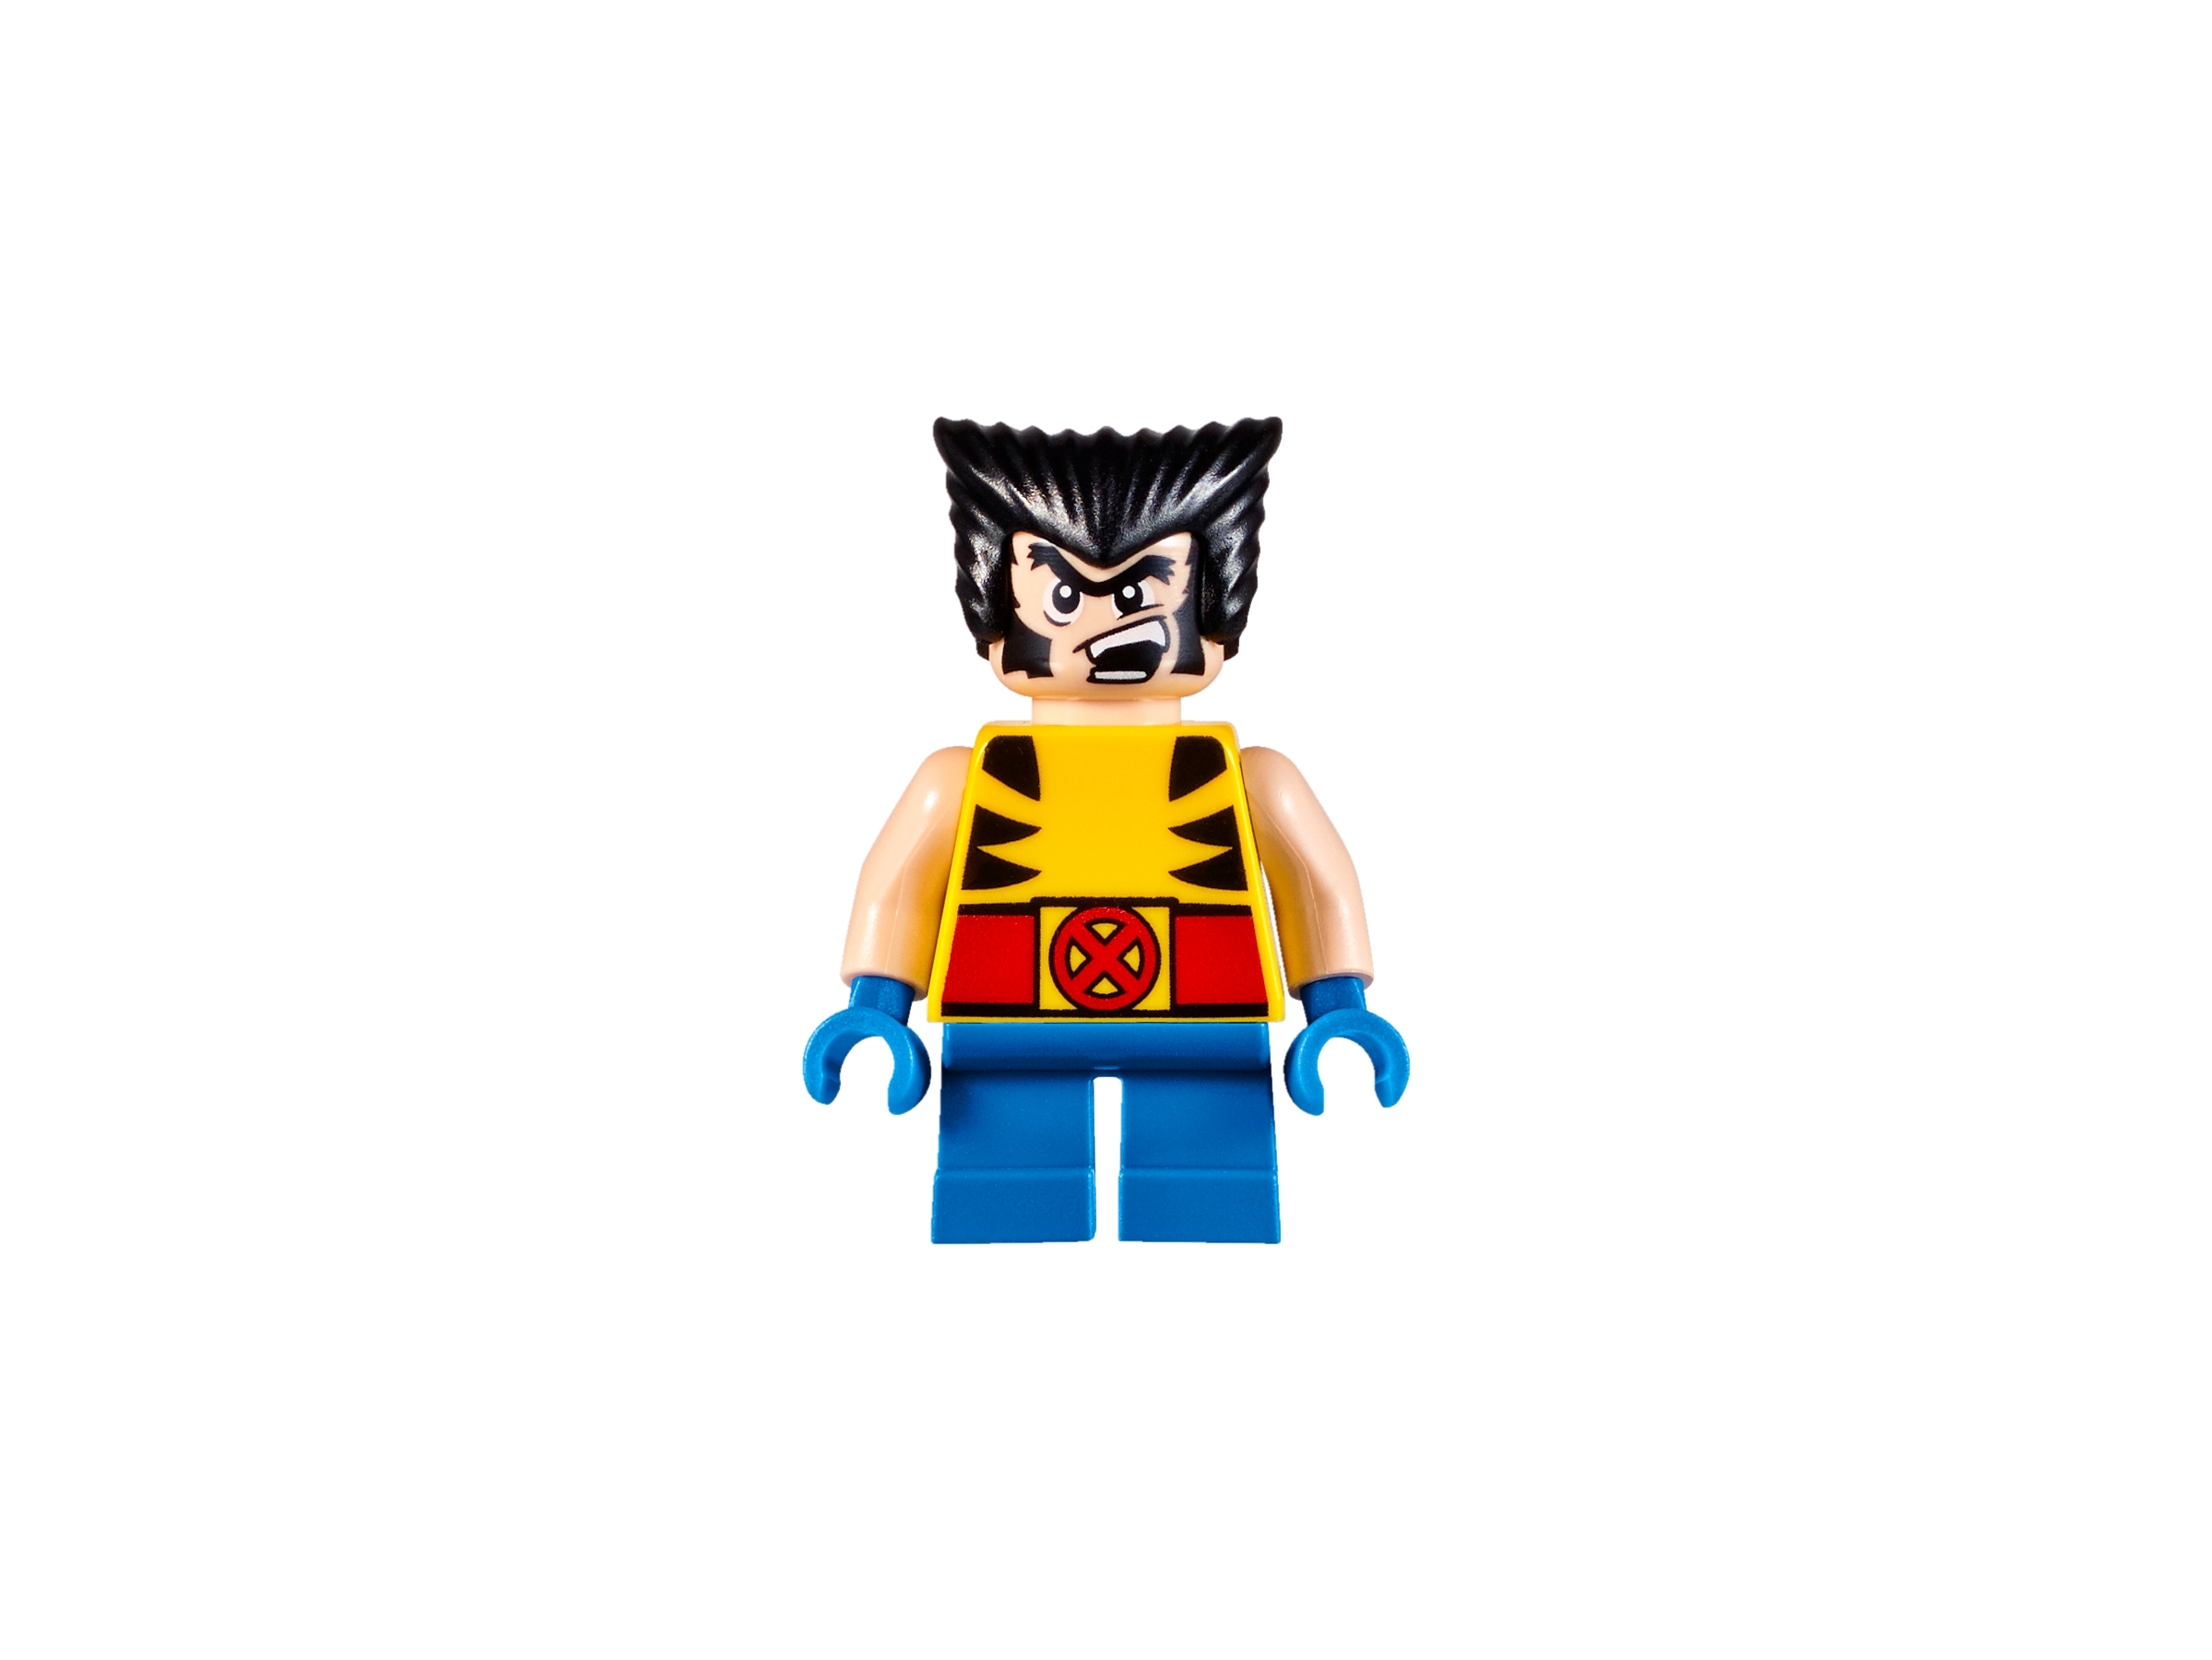 LEGO Wolverine Minifigure sh364 From Super Heroes Set 76073 